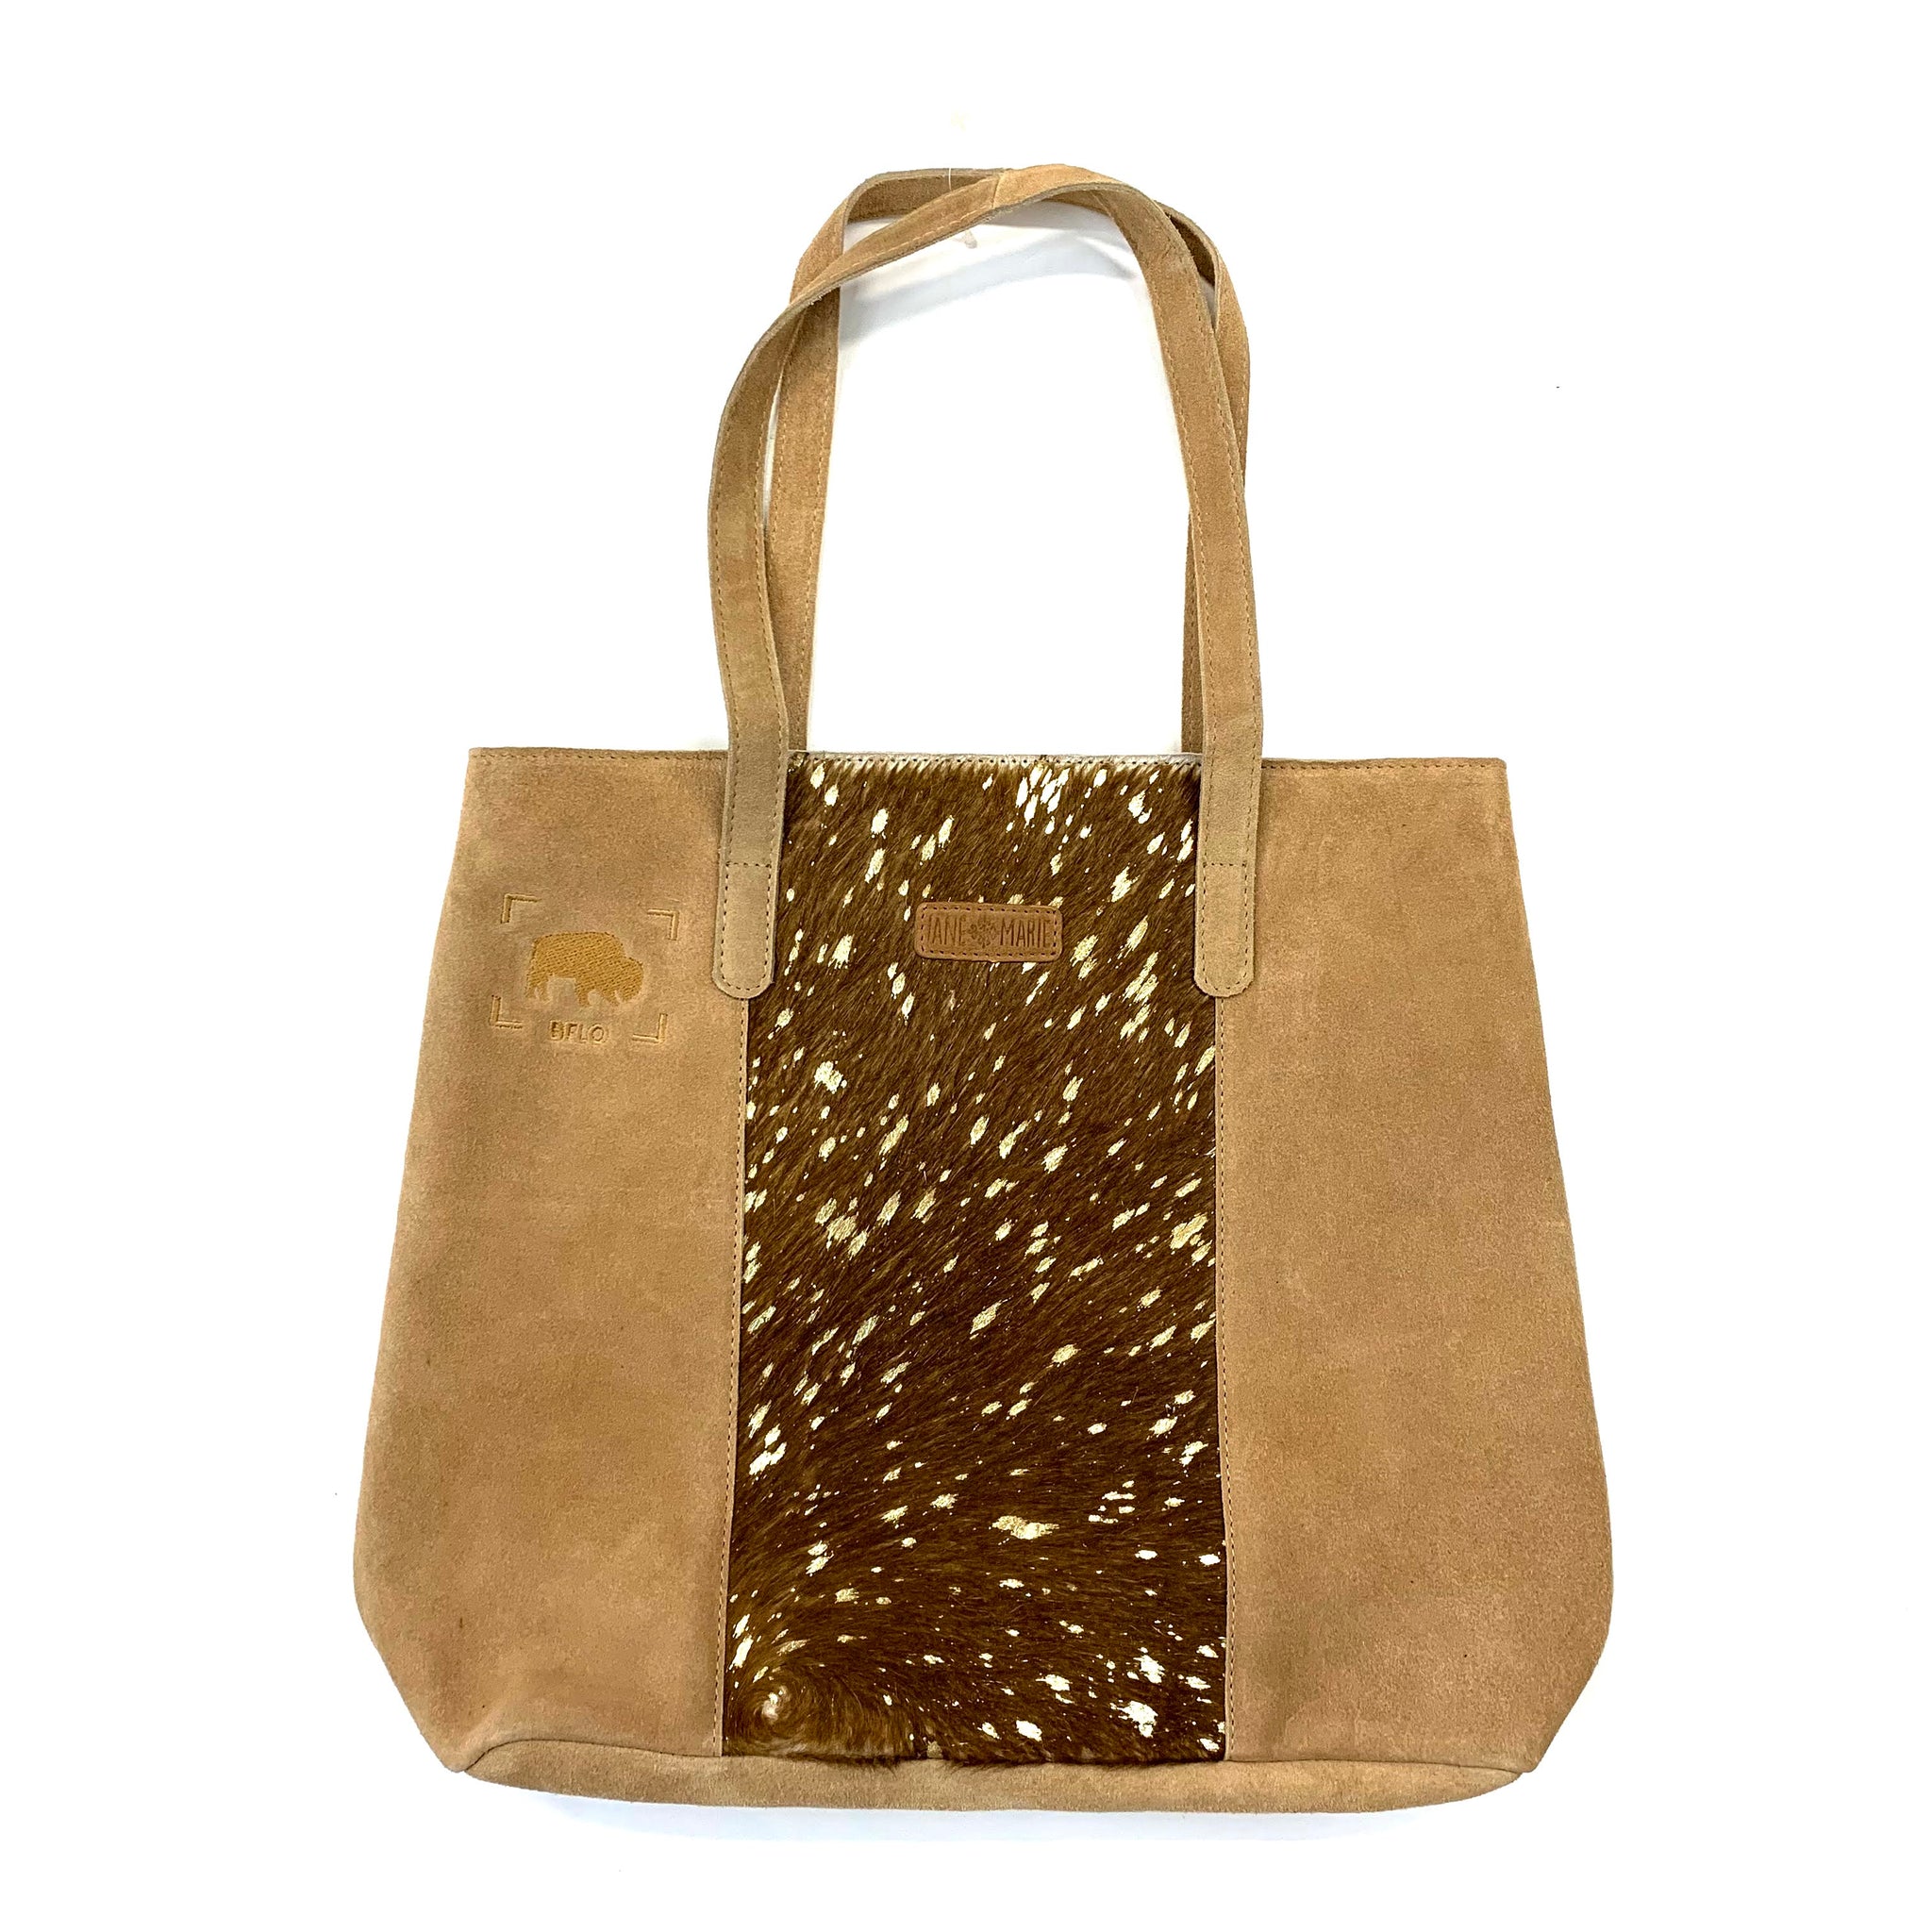 Sunlily Bright Side Color Changing Tote Bag - $29.99